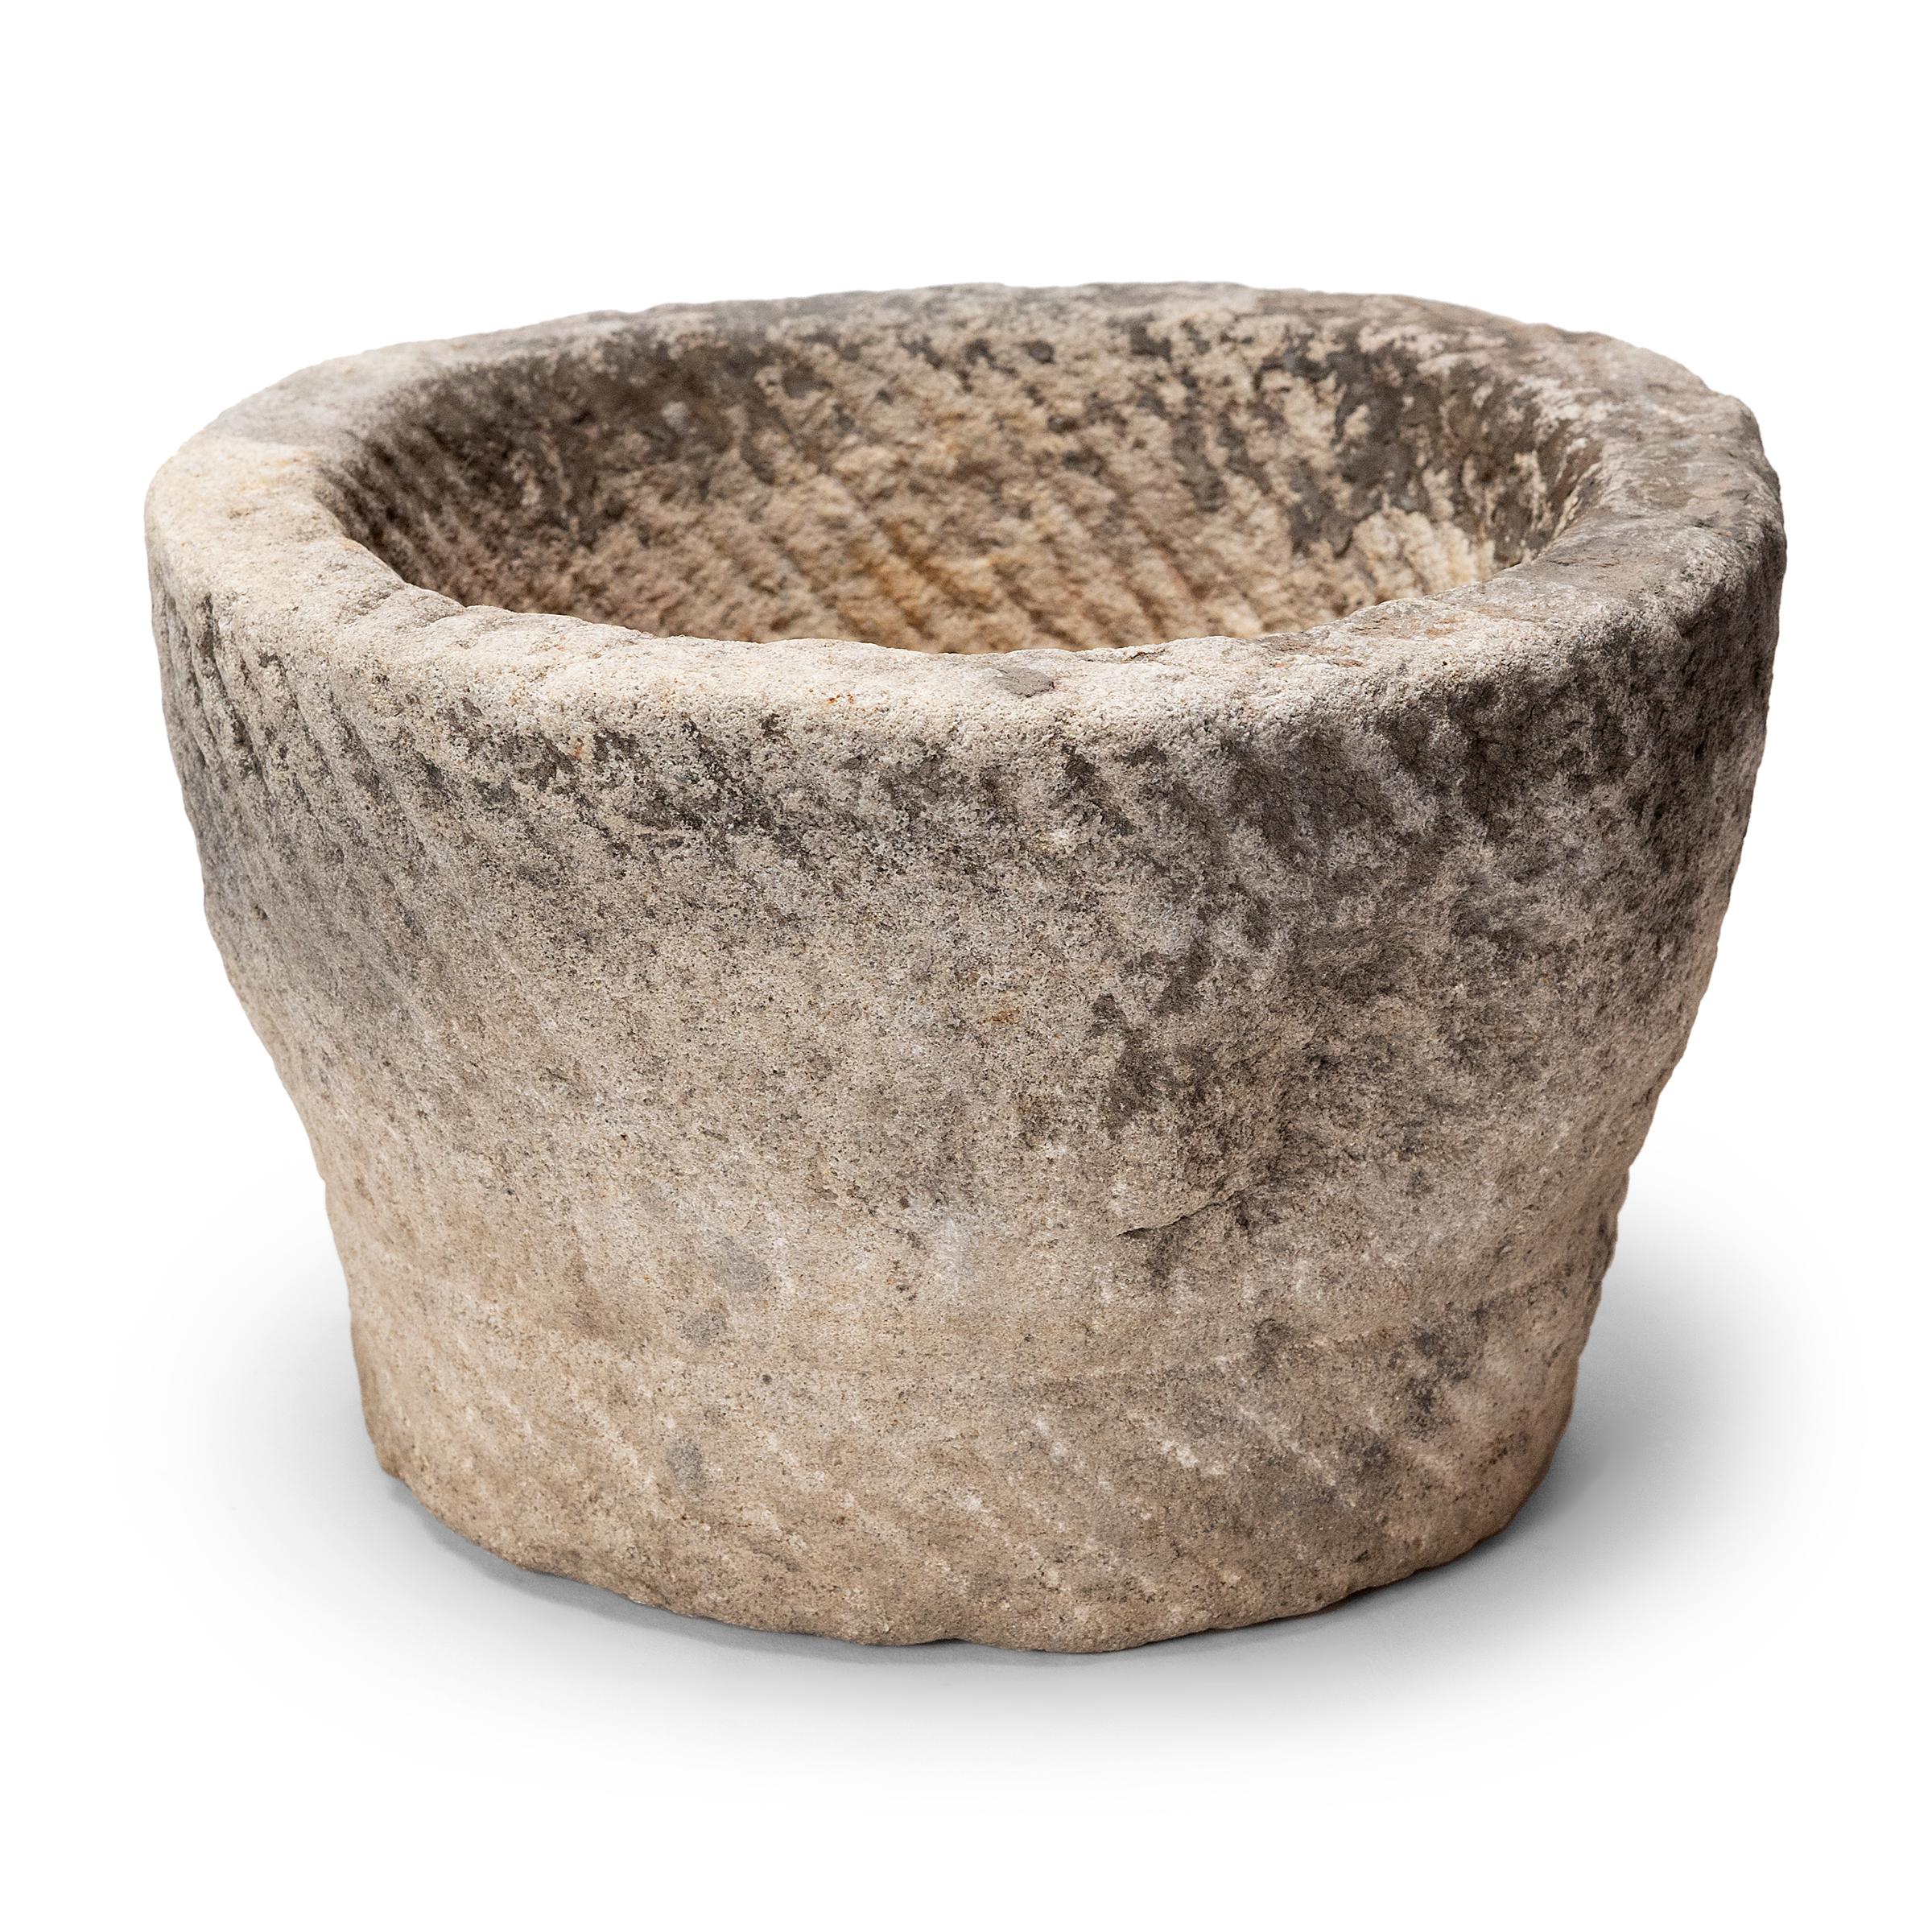 Once used on a provincial Chinese farm to hold water or animal feed, this early 20th-century stone trough is celebrated today for its organic form and rustic authenticity. Hand-carved from solid limestone, the trough has a circular form with slight